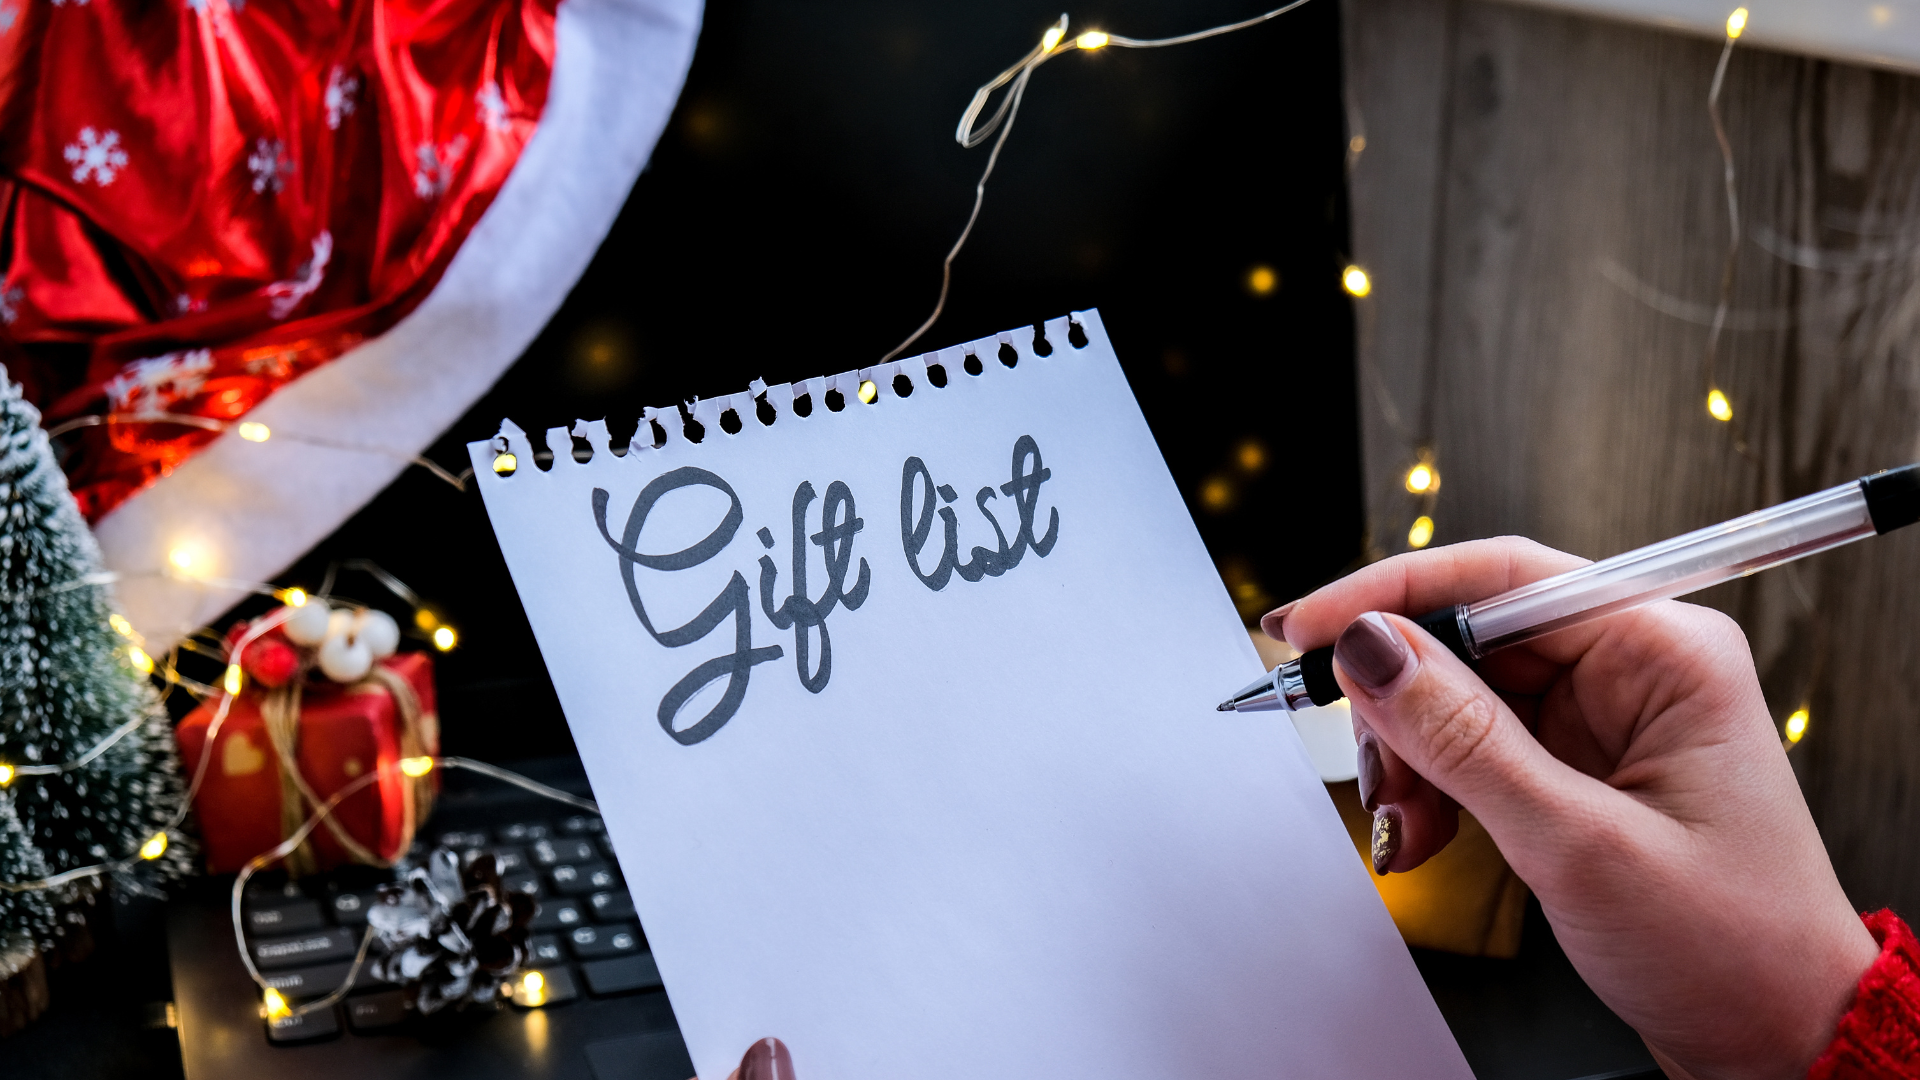 Close up of pen and list saying 'gift list' with Christmas decor in background